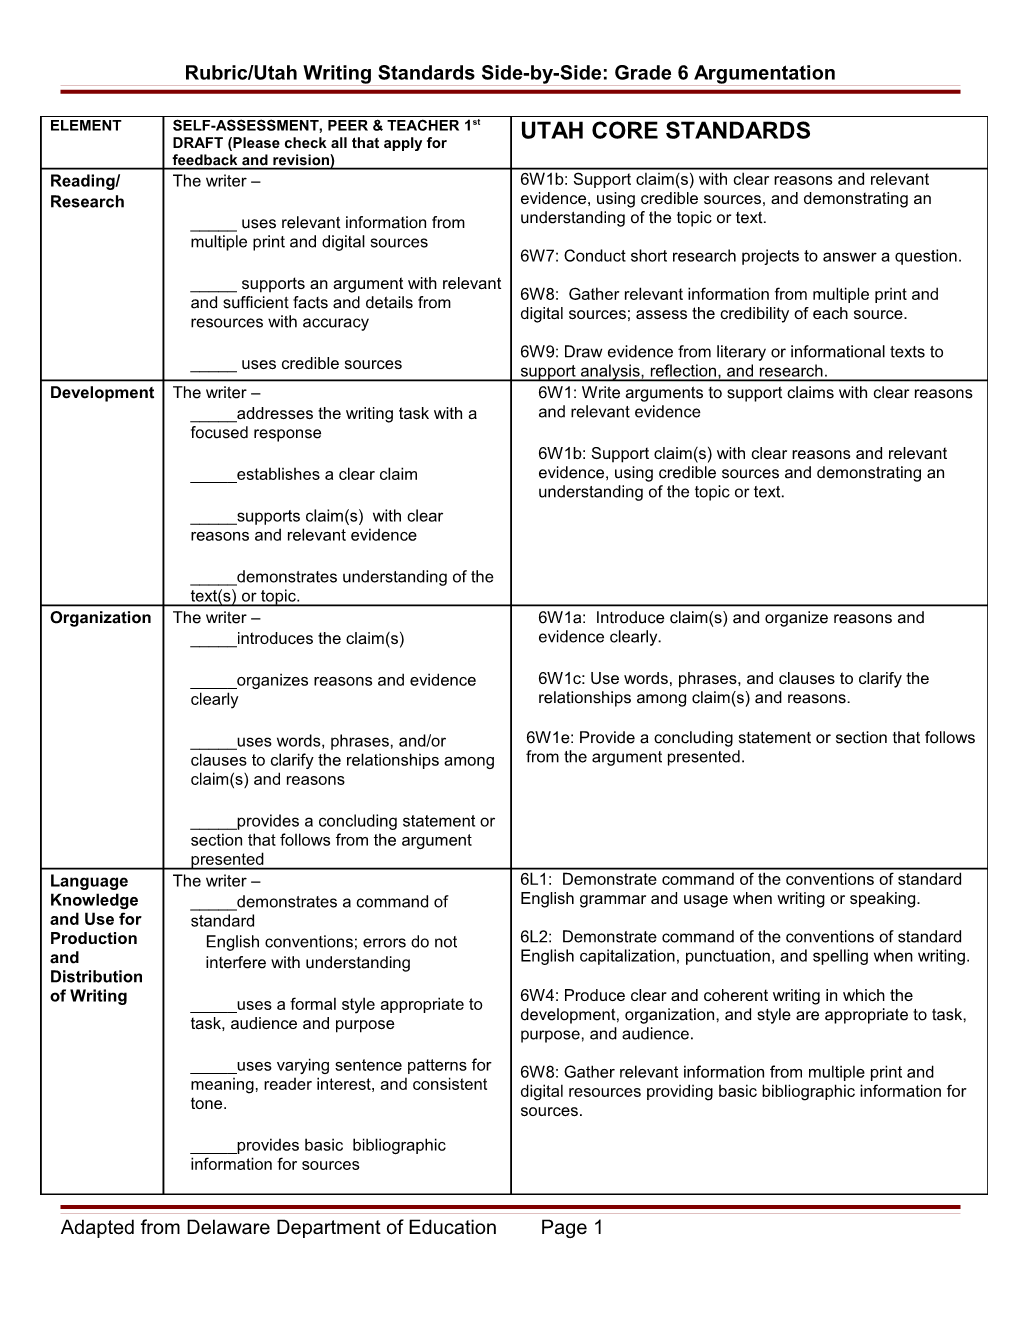 Rubric/CCSS Writing Standards Side-By-Side: Grade 6 Argumentation